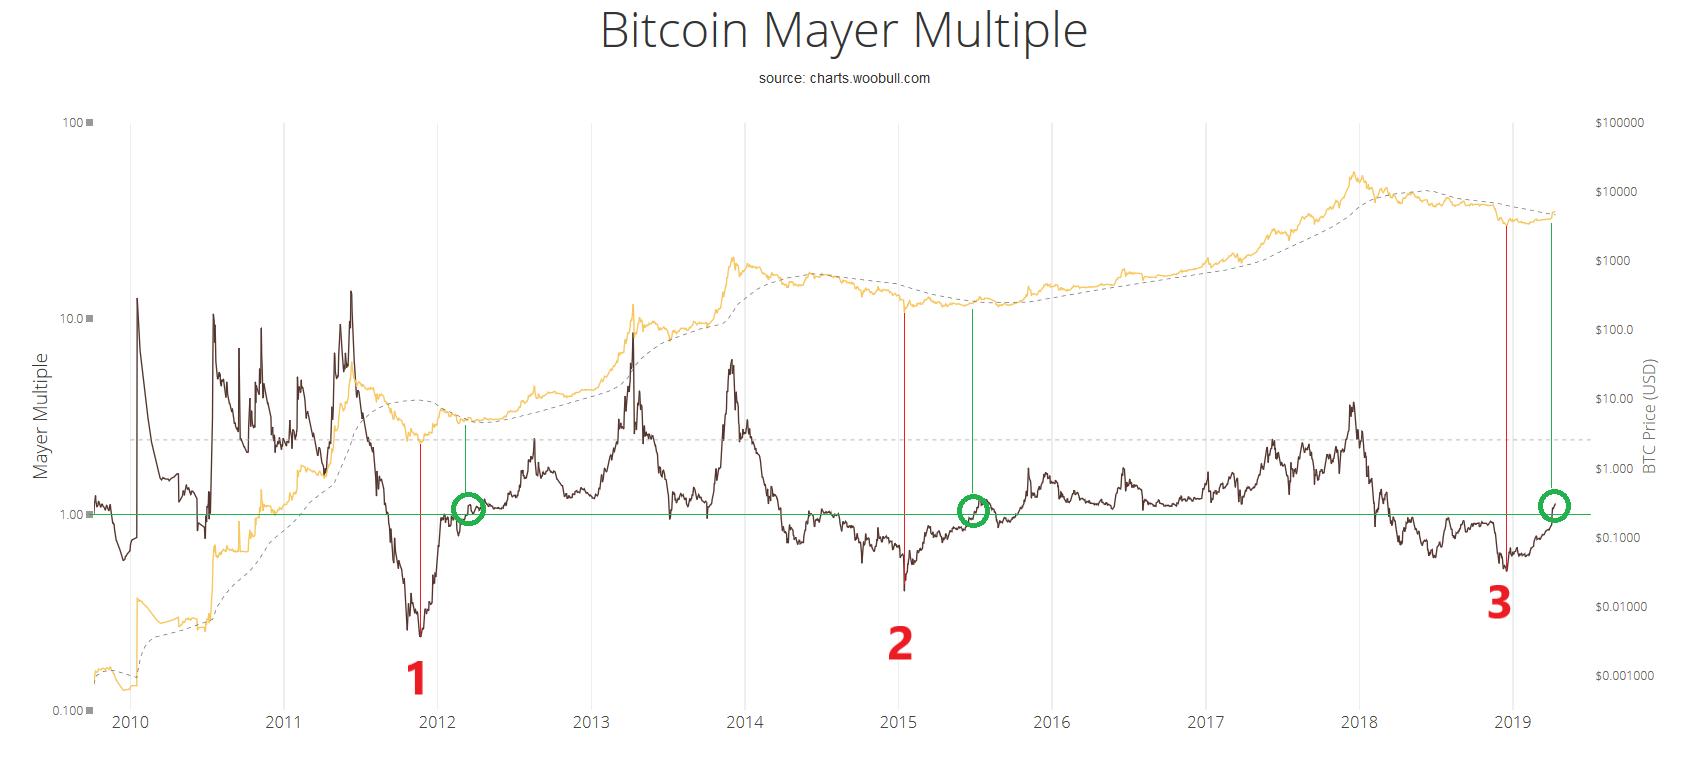 Ethereum Price Prediction: Mayer Multiple Points to Capitulation